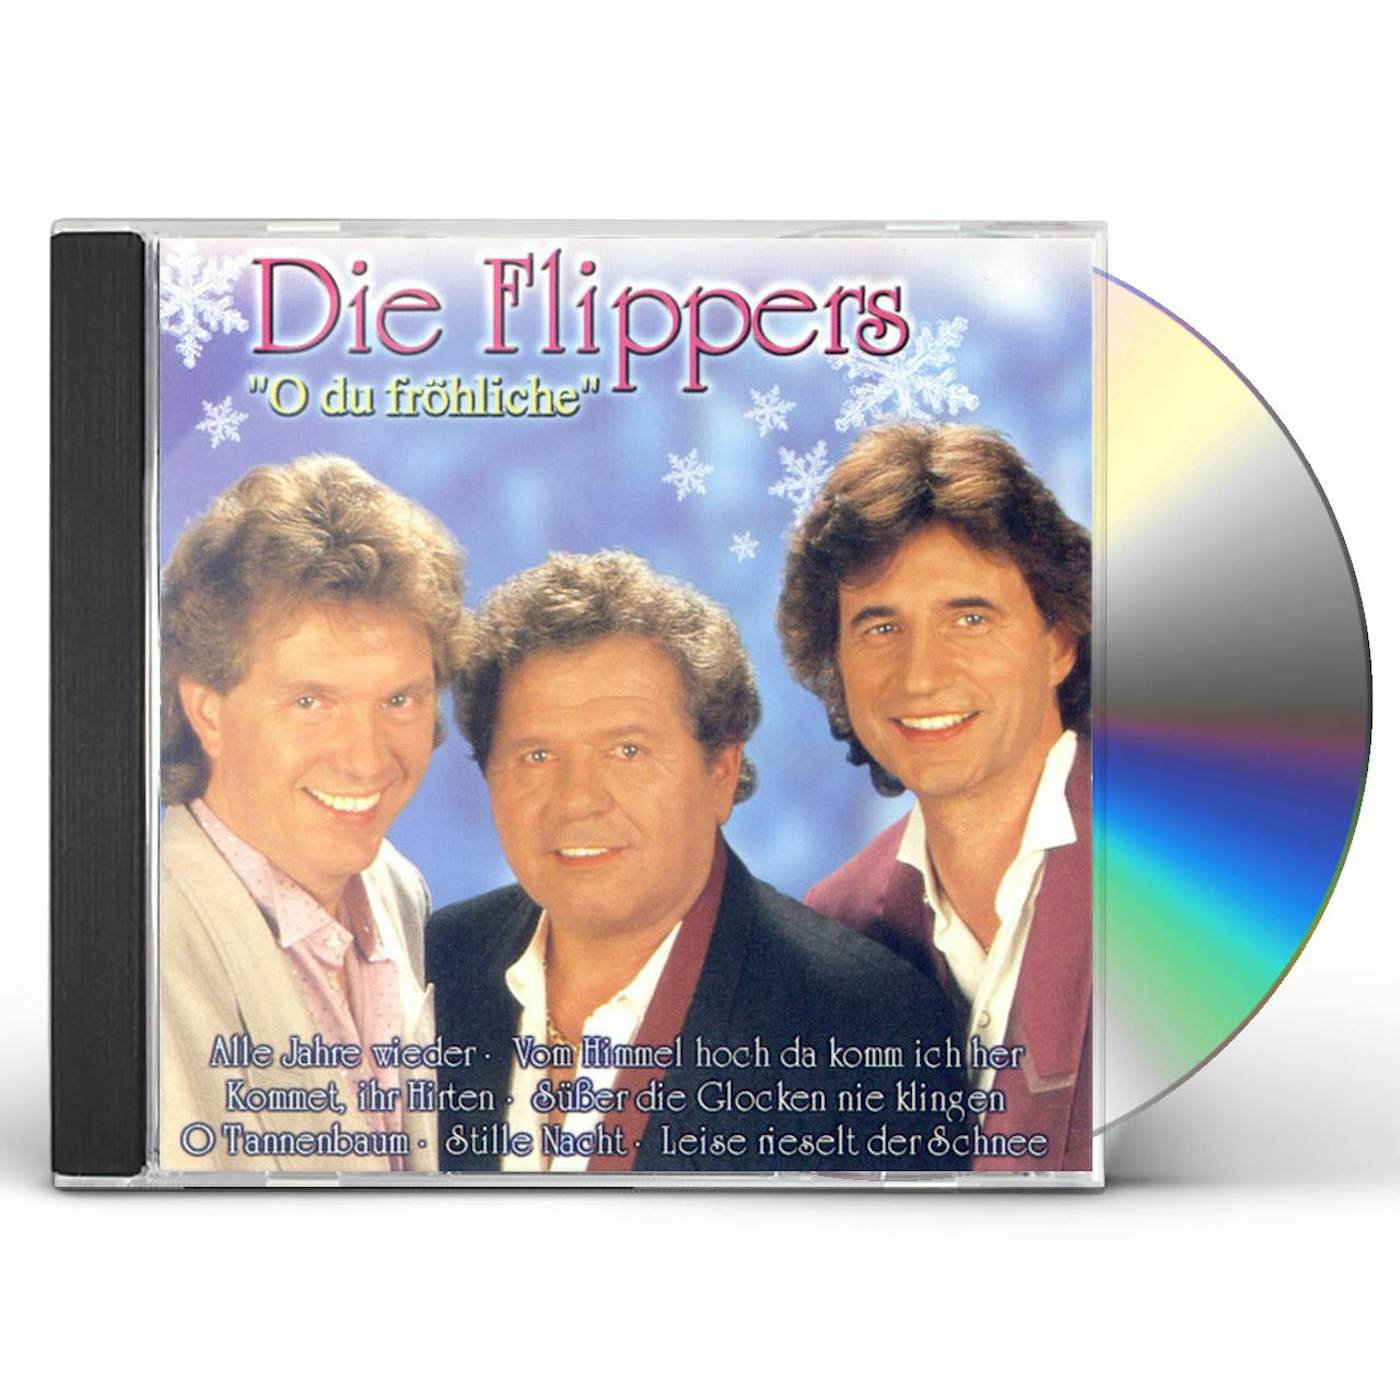 Die Flippers O DU FROHLICHE CD